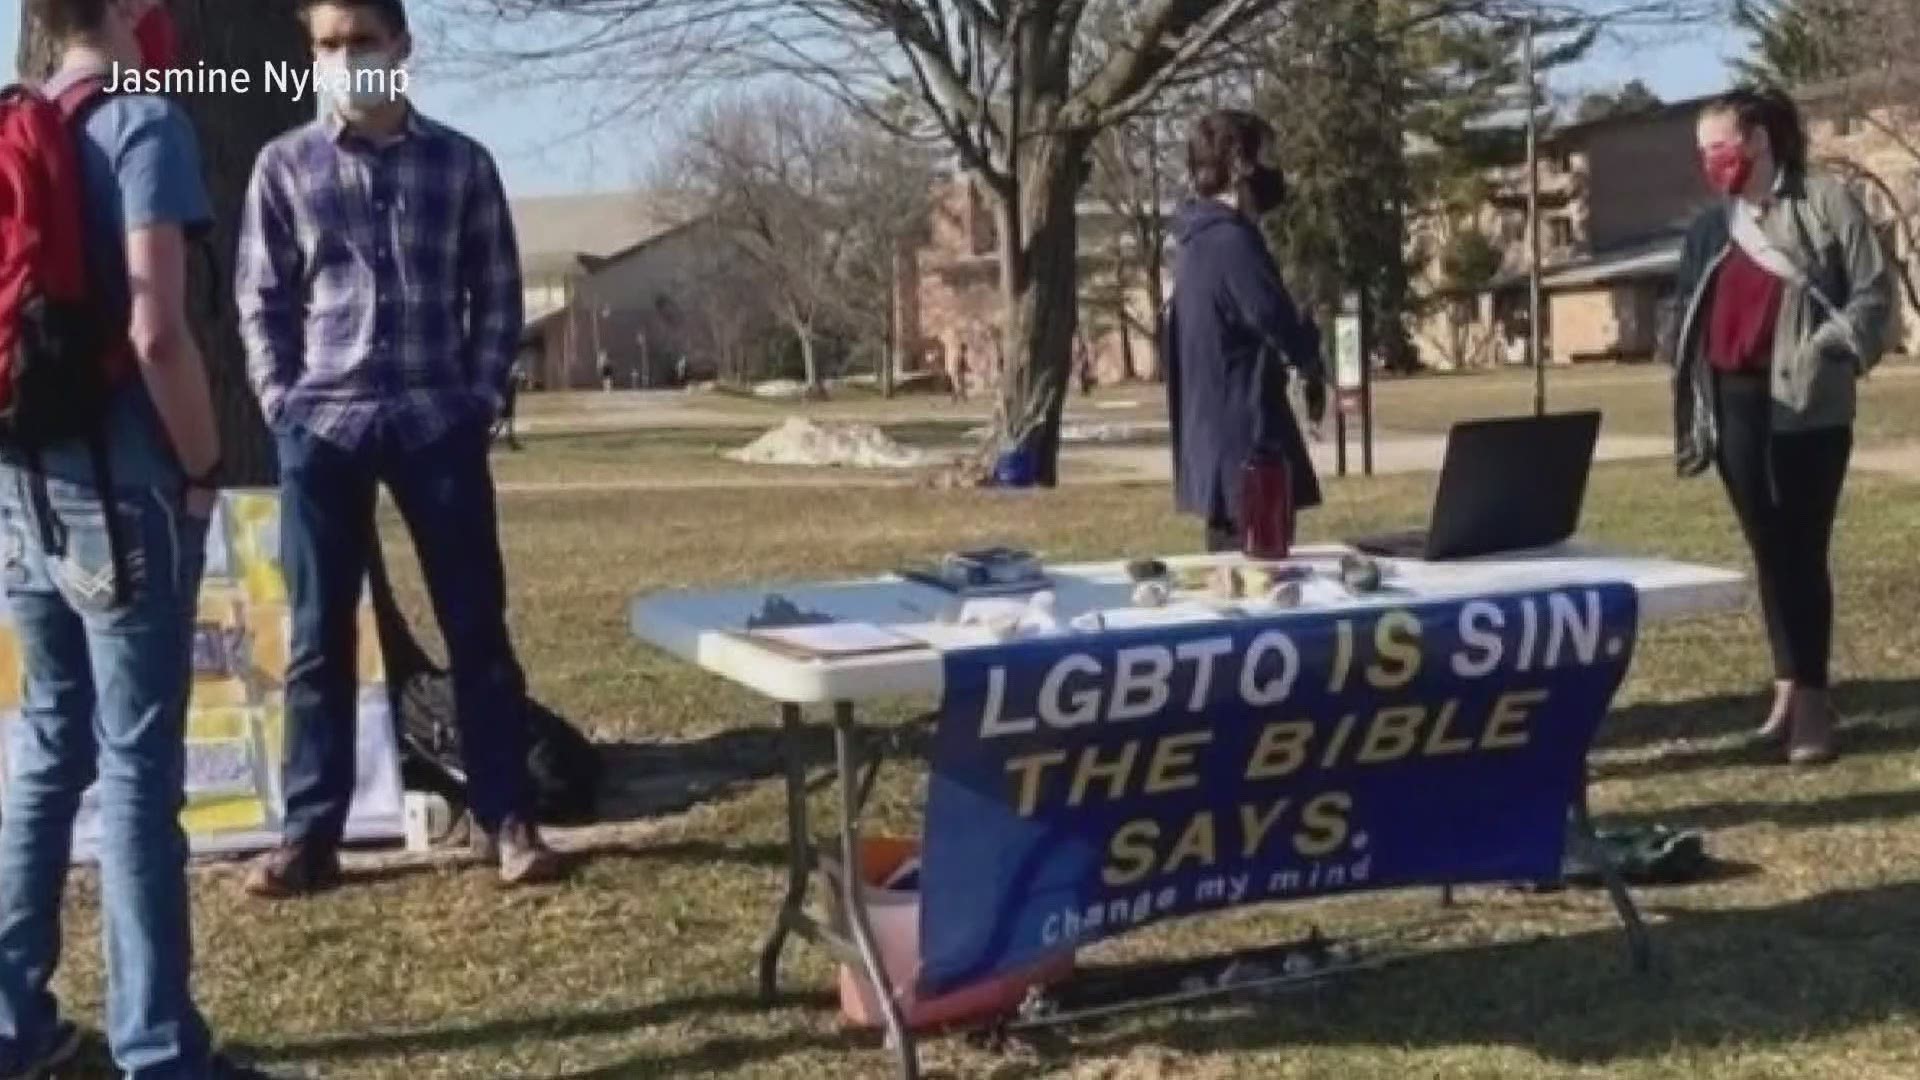 A sign at Calvin University has caused controversy on campus this week. It read - "LGBTQ is a sin. The Bible Says. Change my mind."